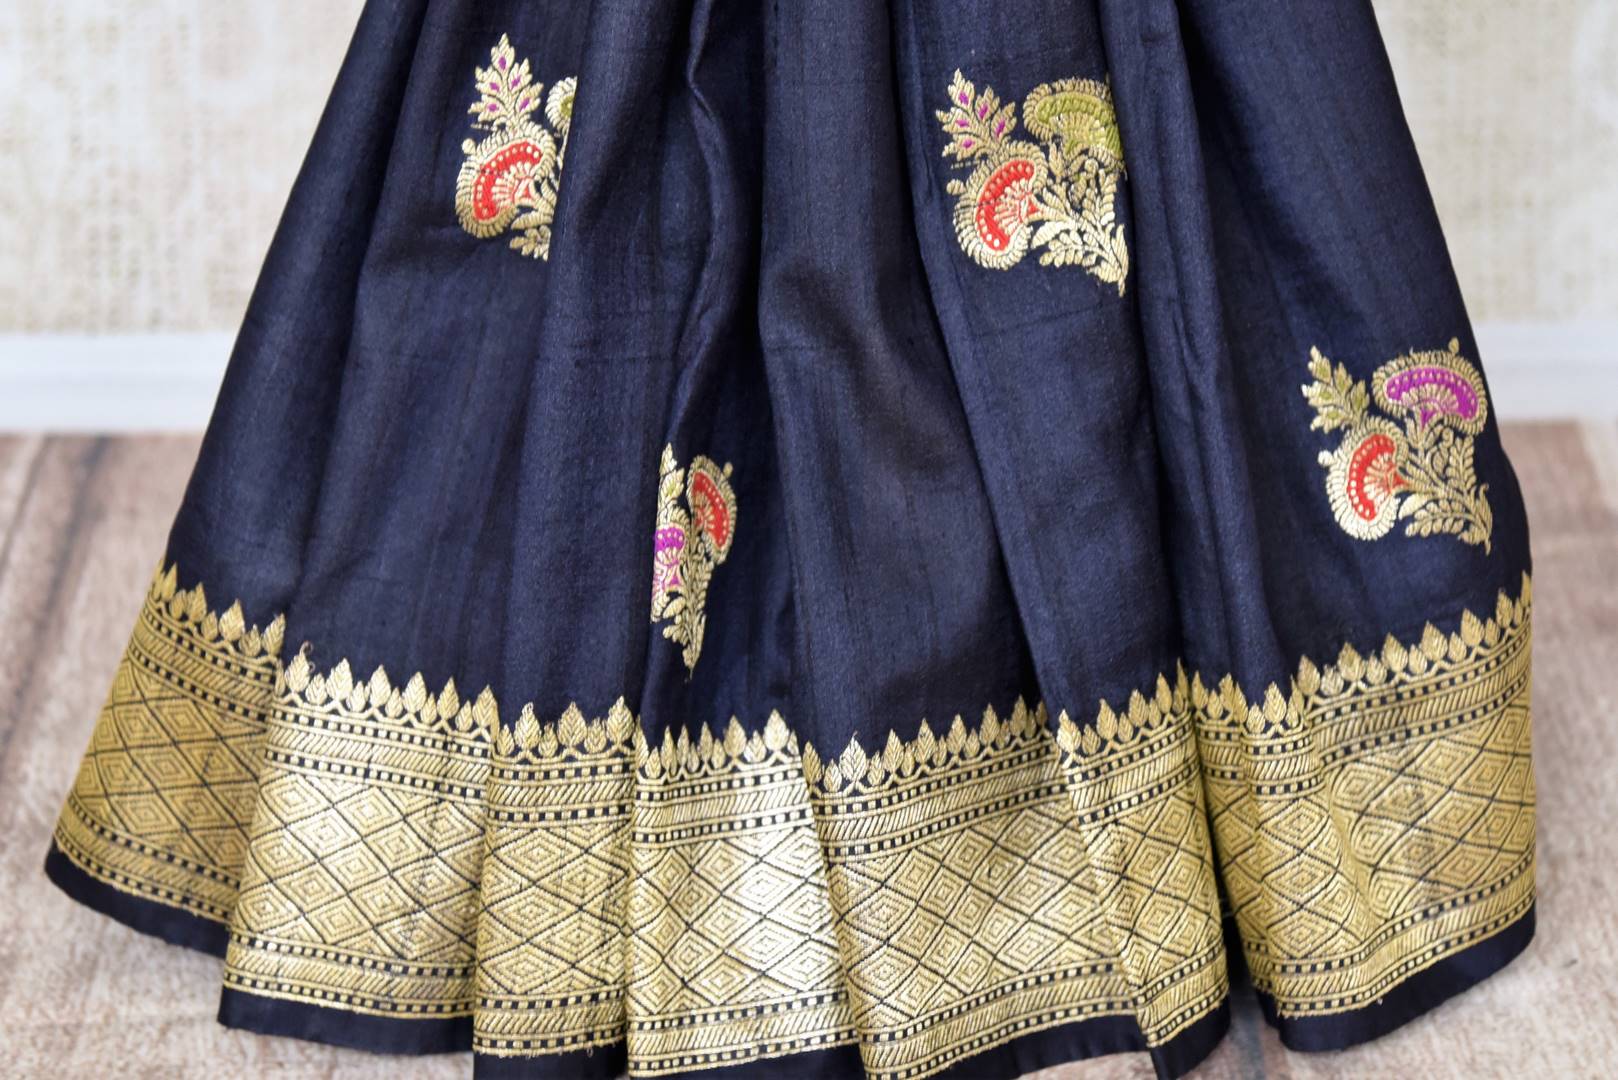 Buy black khaddi Banarasi saree online in USA with zari minakari floral buta. Feel traditional on special occasions in beautiful Indian designer saris from Pure Elegance Indian fashion store in USA. Choose from a splendid variety of Banarasi sarees, pure handwoven saris. Buy online.-pleats